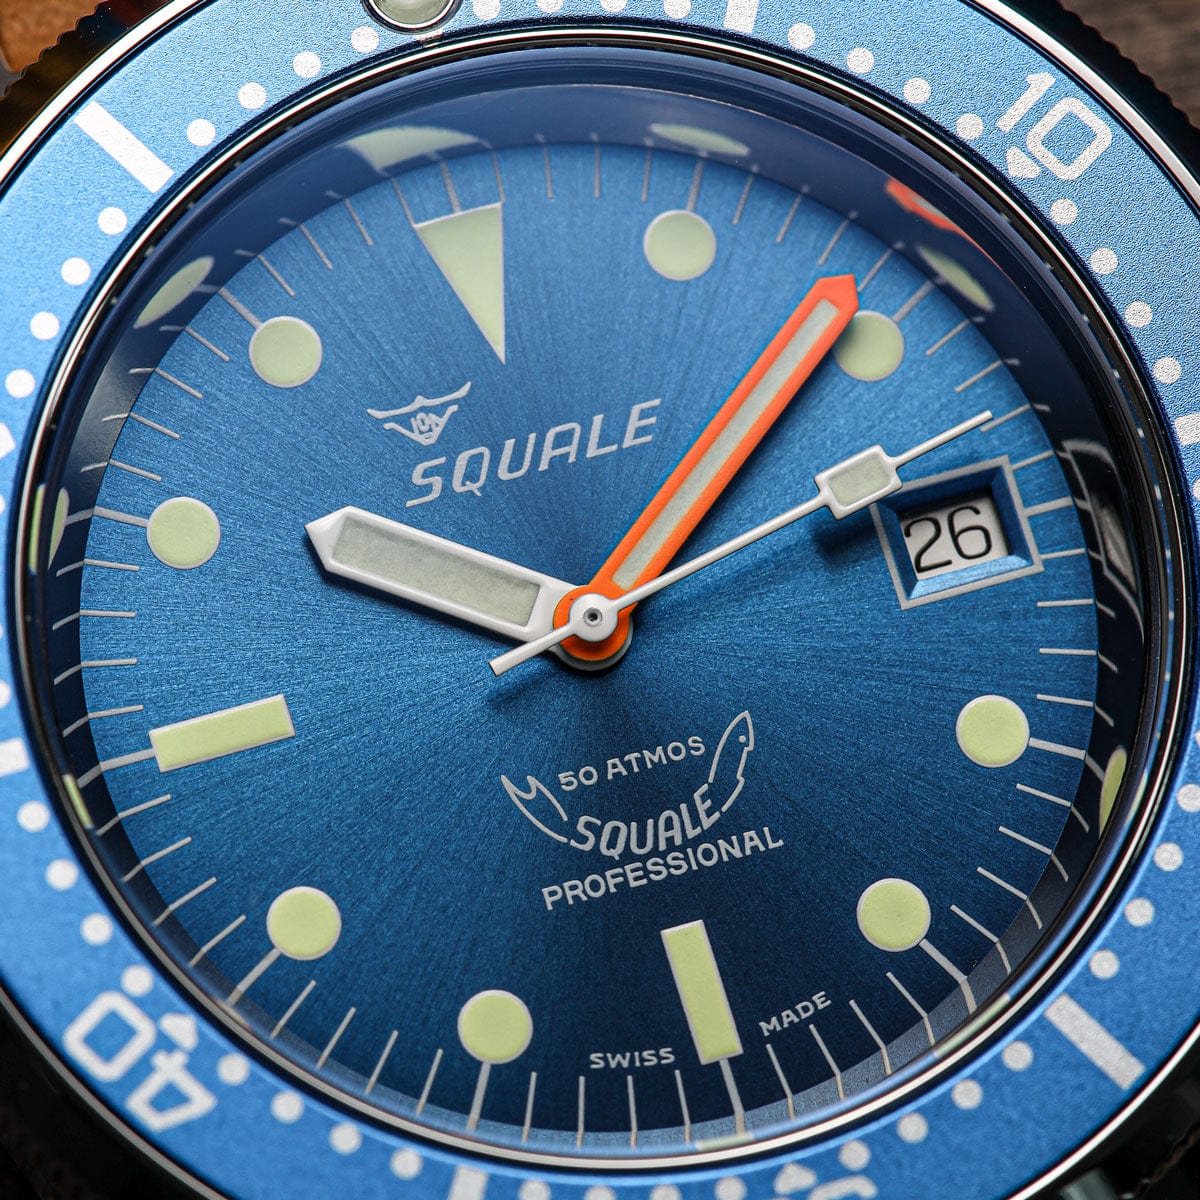 Squale 1521 Swiss Made Divers Watch, Ocean Blue Polished Case - Mesh - NEARLY NEW